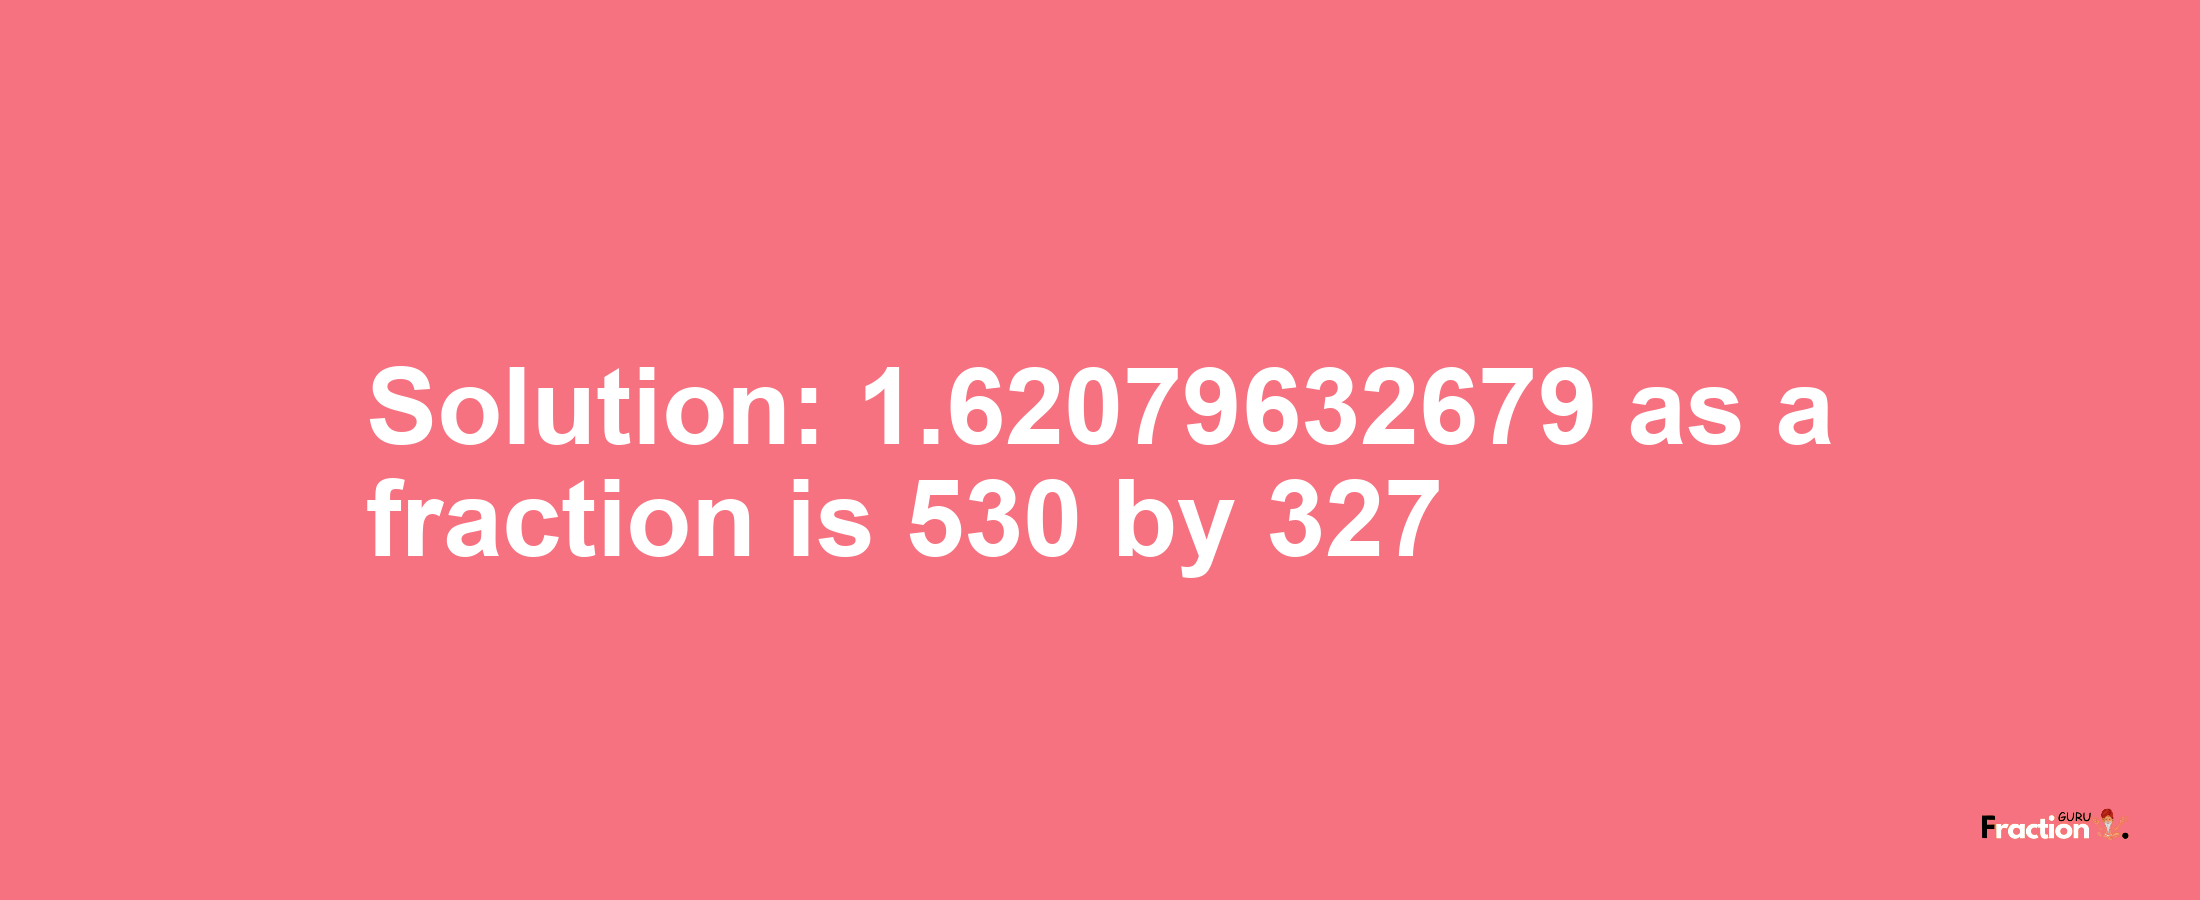 Solution:1.62079632679 as a fraction is 530/327